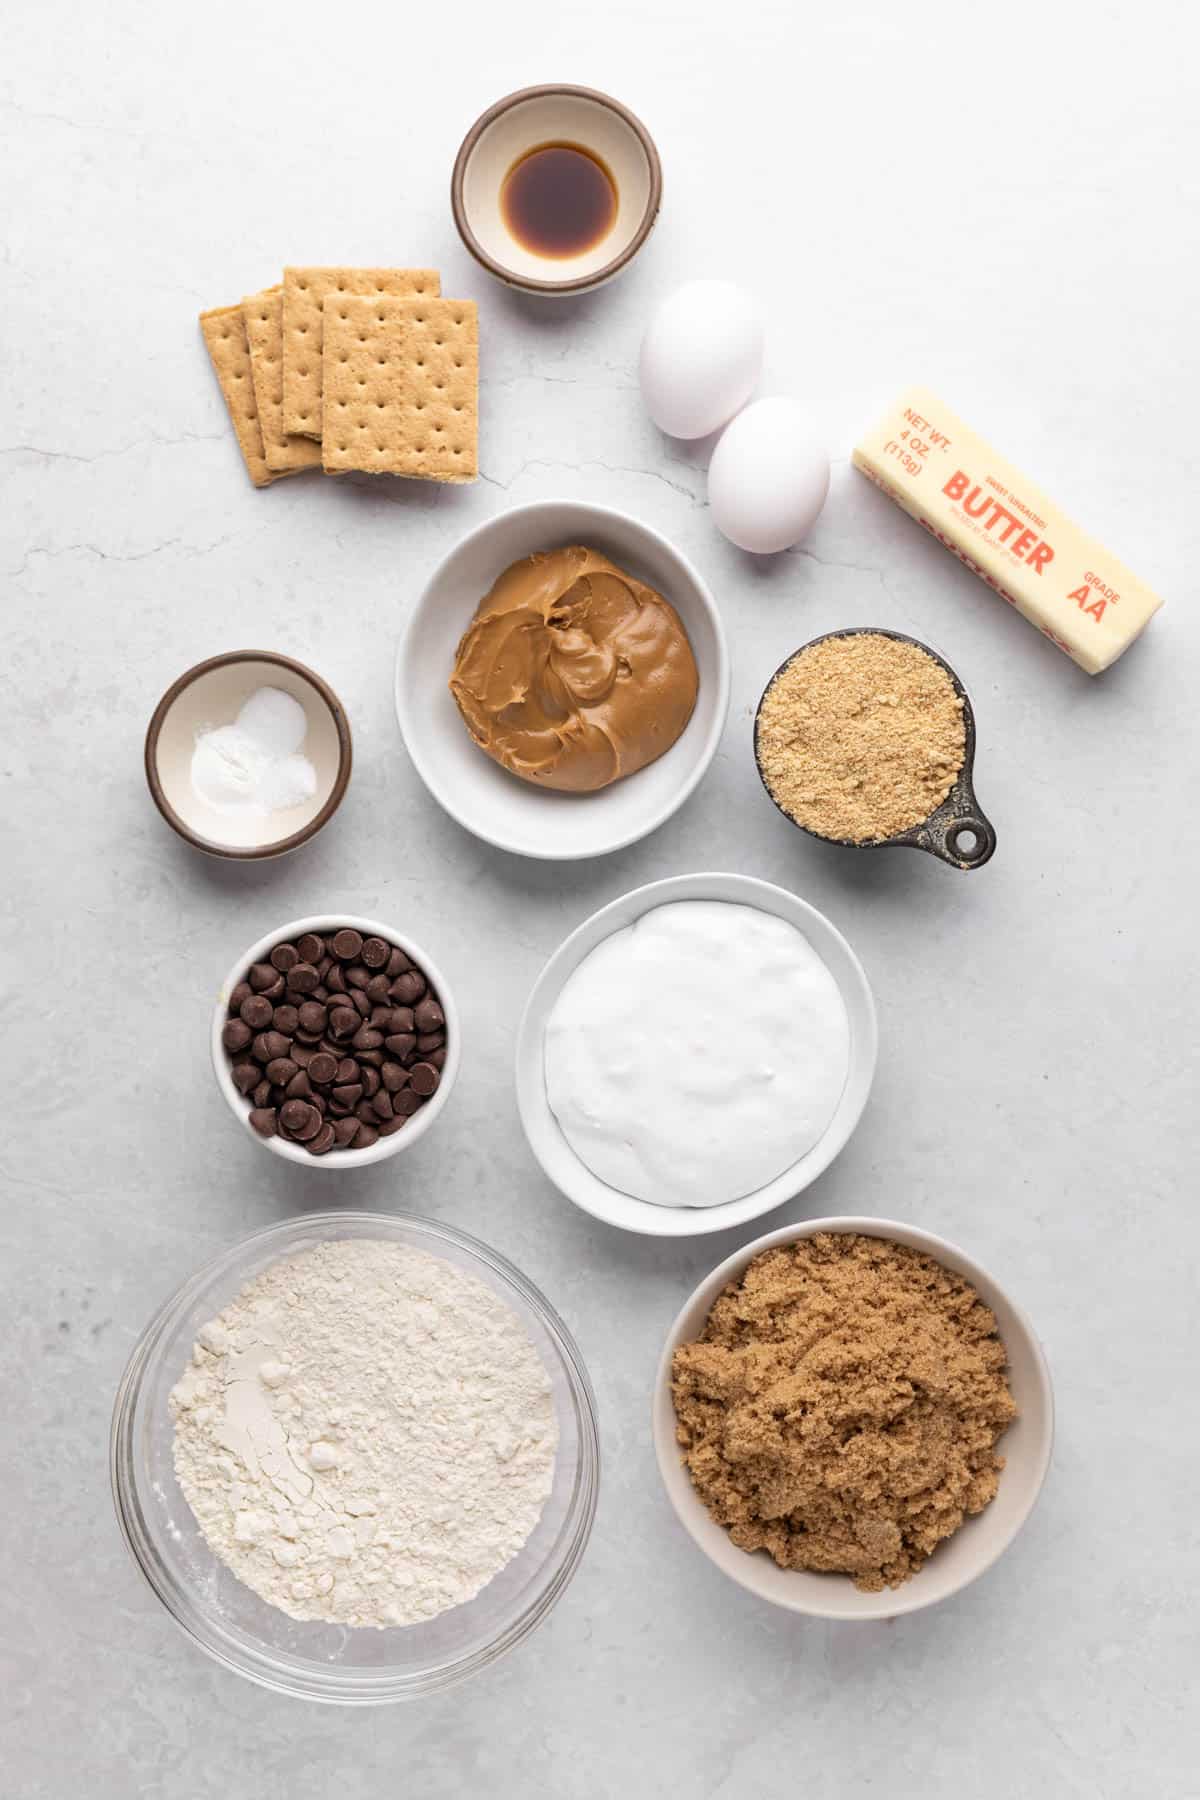 Ingredients for s'mores blondies in bowls set o a flat surface.